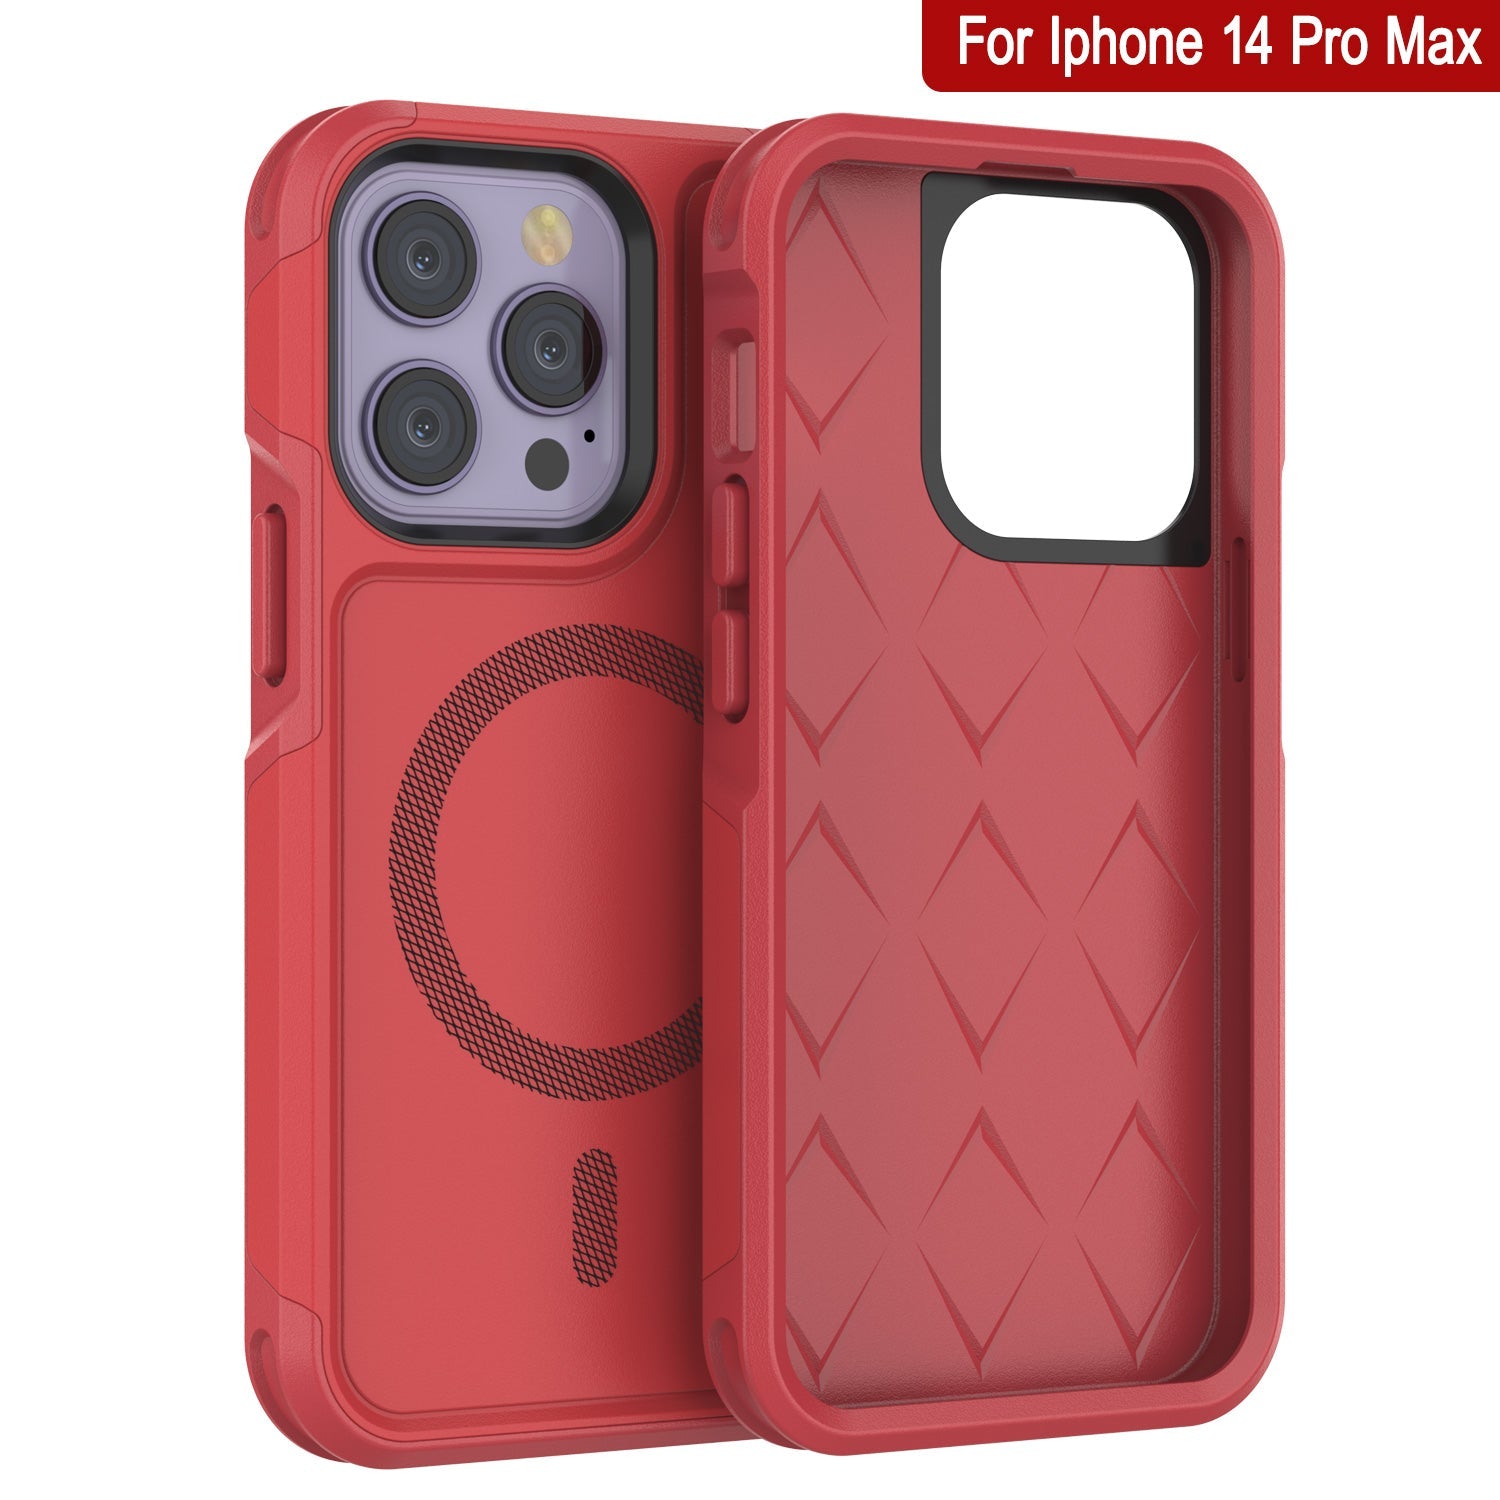 PunkCase iPhone 14 Pro Max Case, [Spartan 2.0 Series] Clear Rugged Heavy Duty Cover W/Built in Screen Protector [Red]